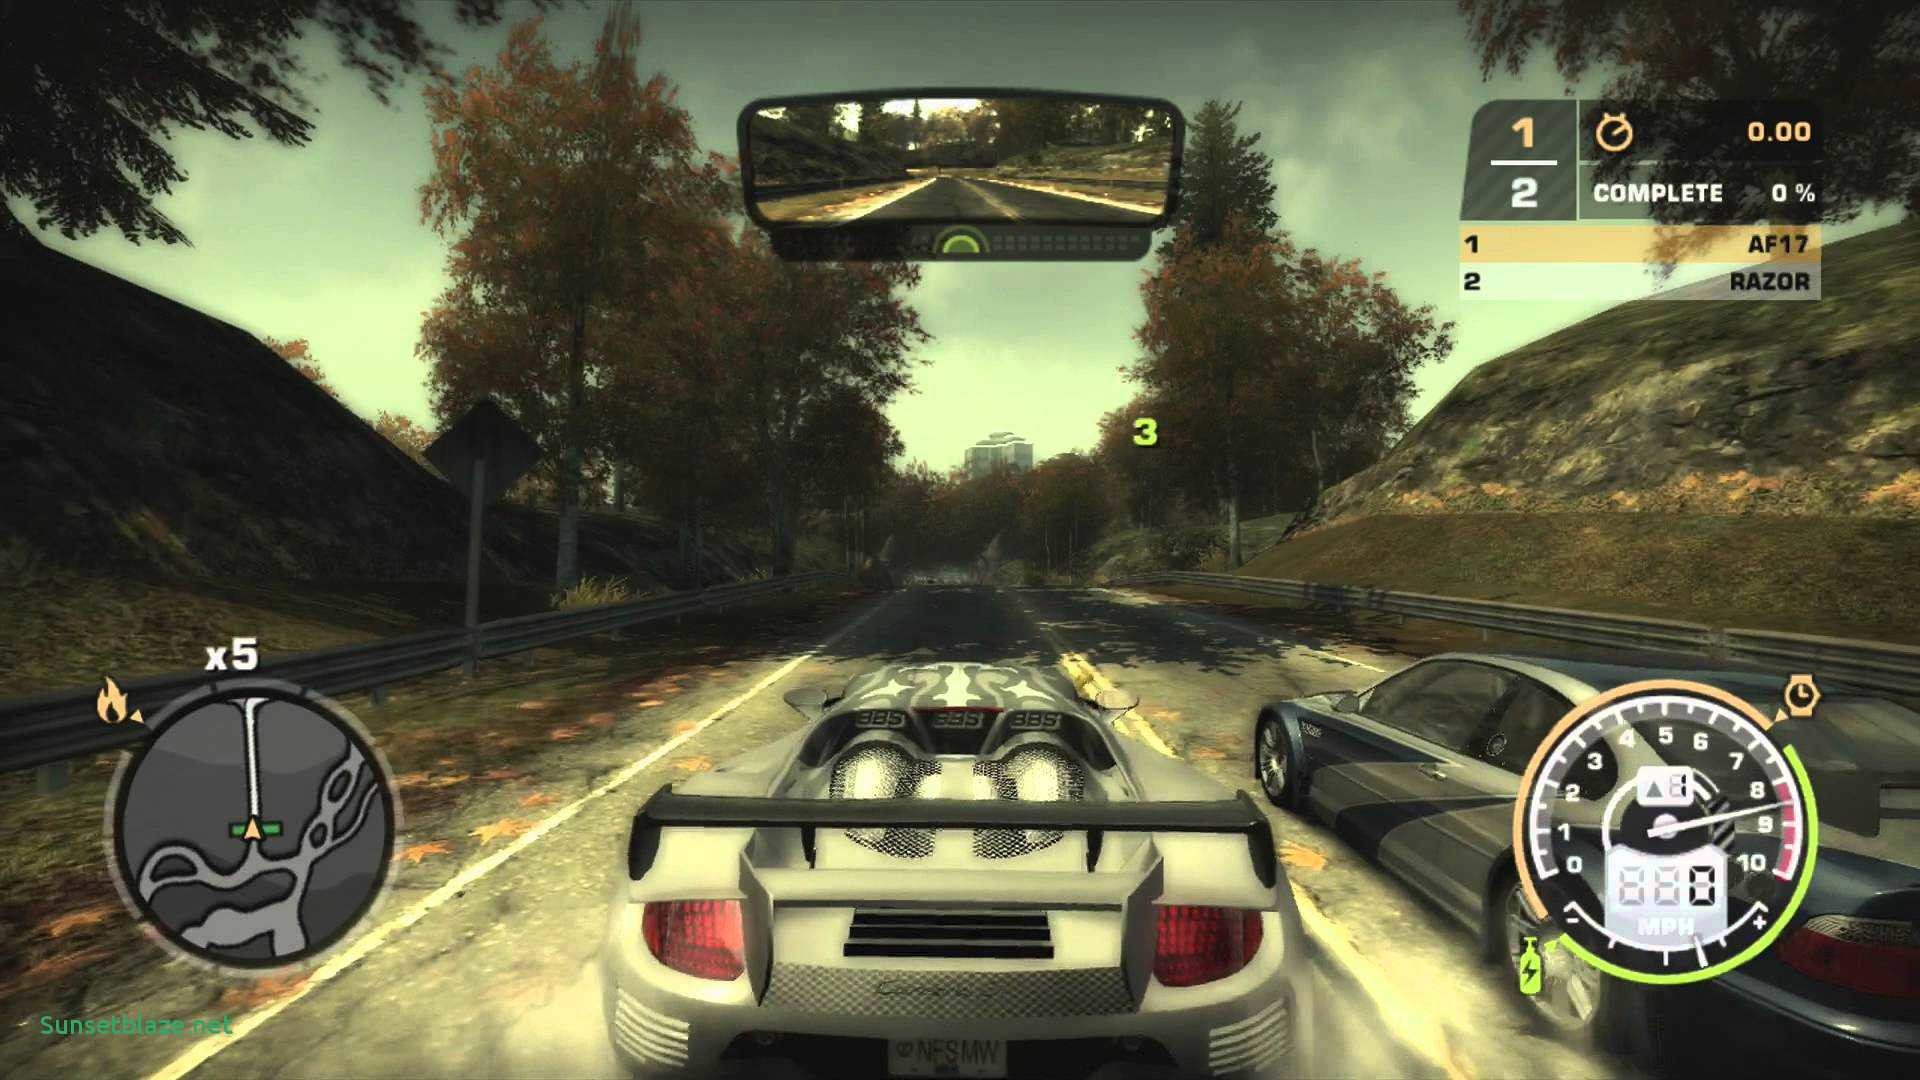 1920x1080 Need for Speed Most Wanted Final Boss Razor All 5 Races Final Unique Of  Need for